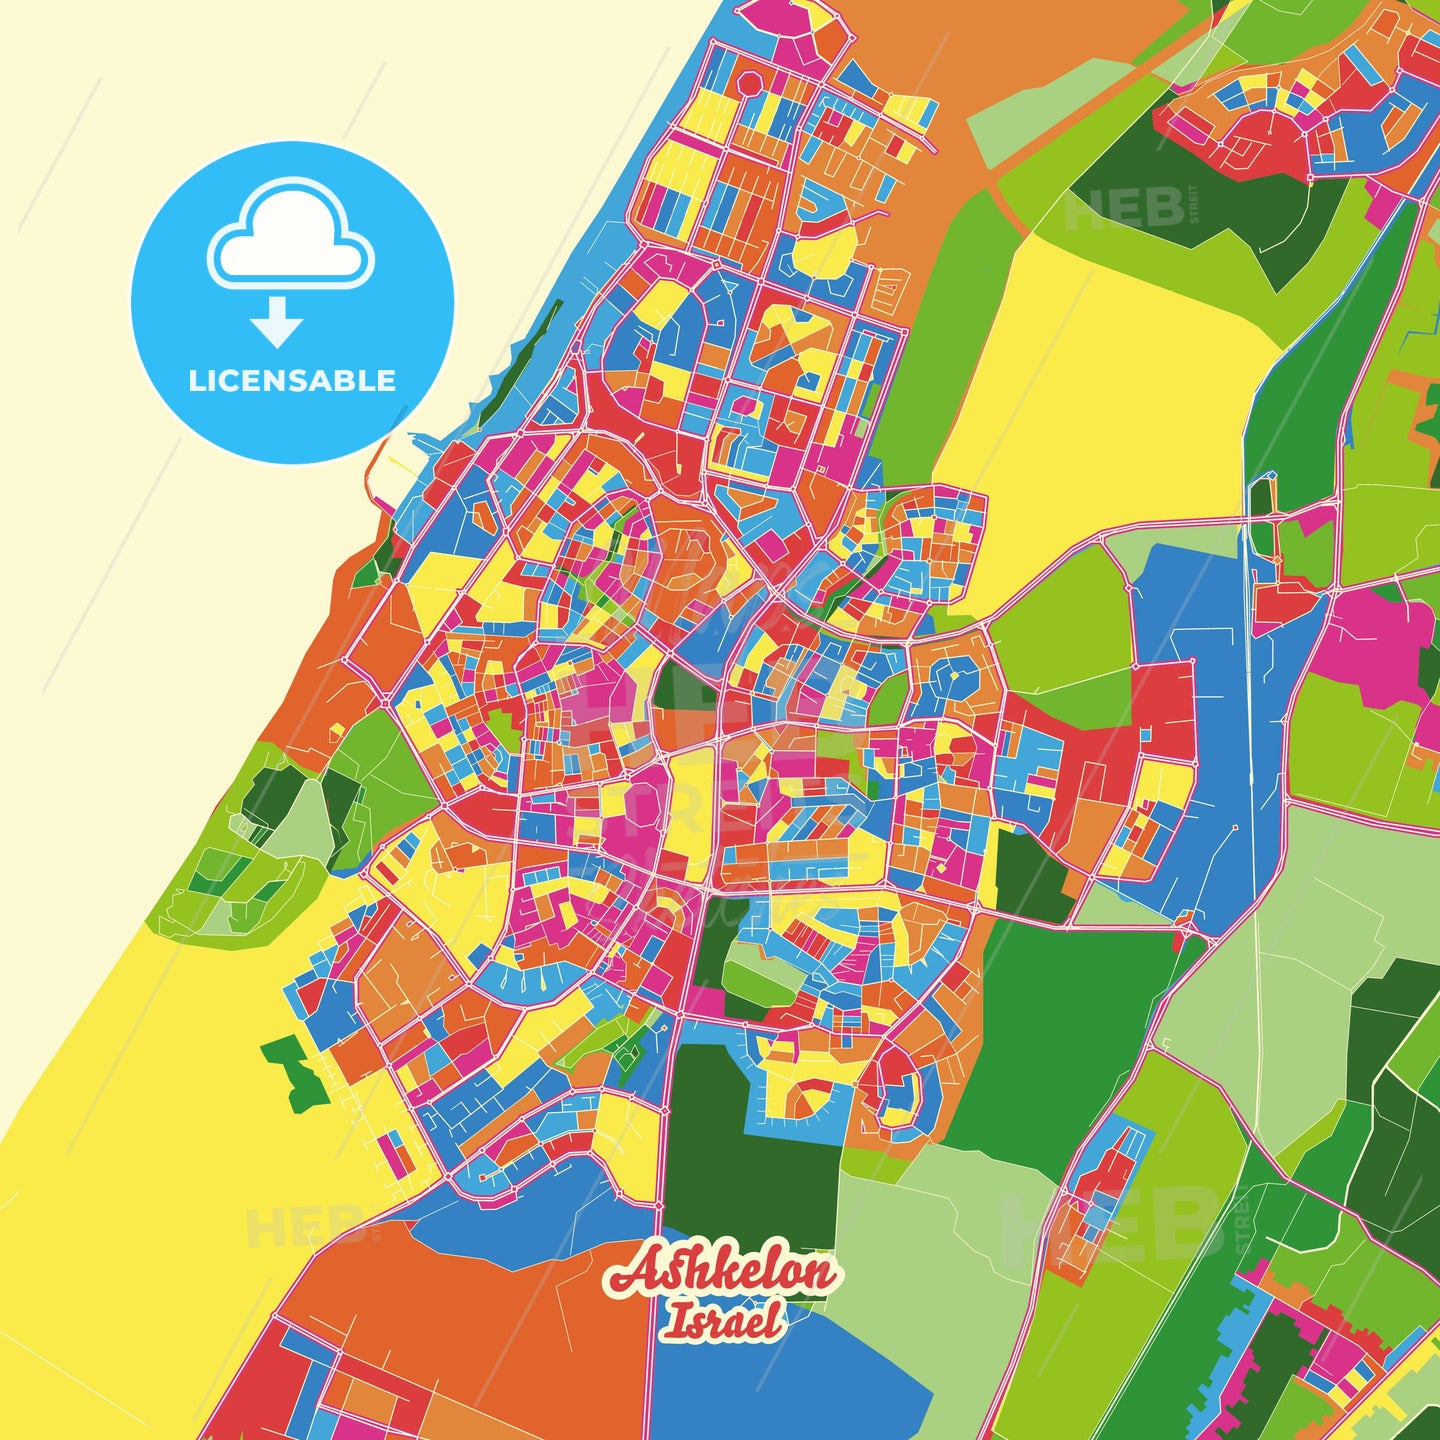 Ashkelon, Israel Crazy Colorful Street Map Poster Template - HEBSTREITS Sketches